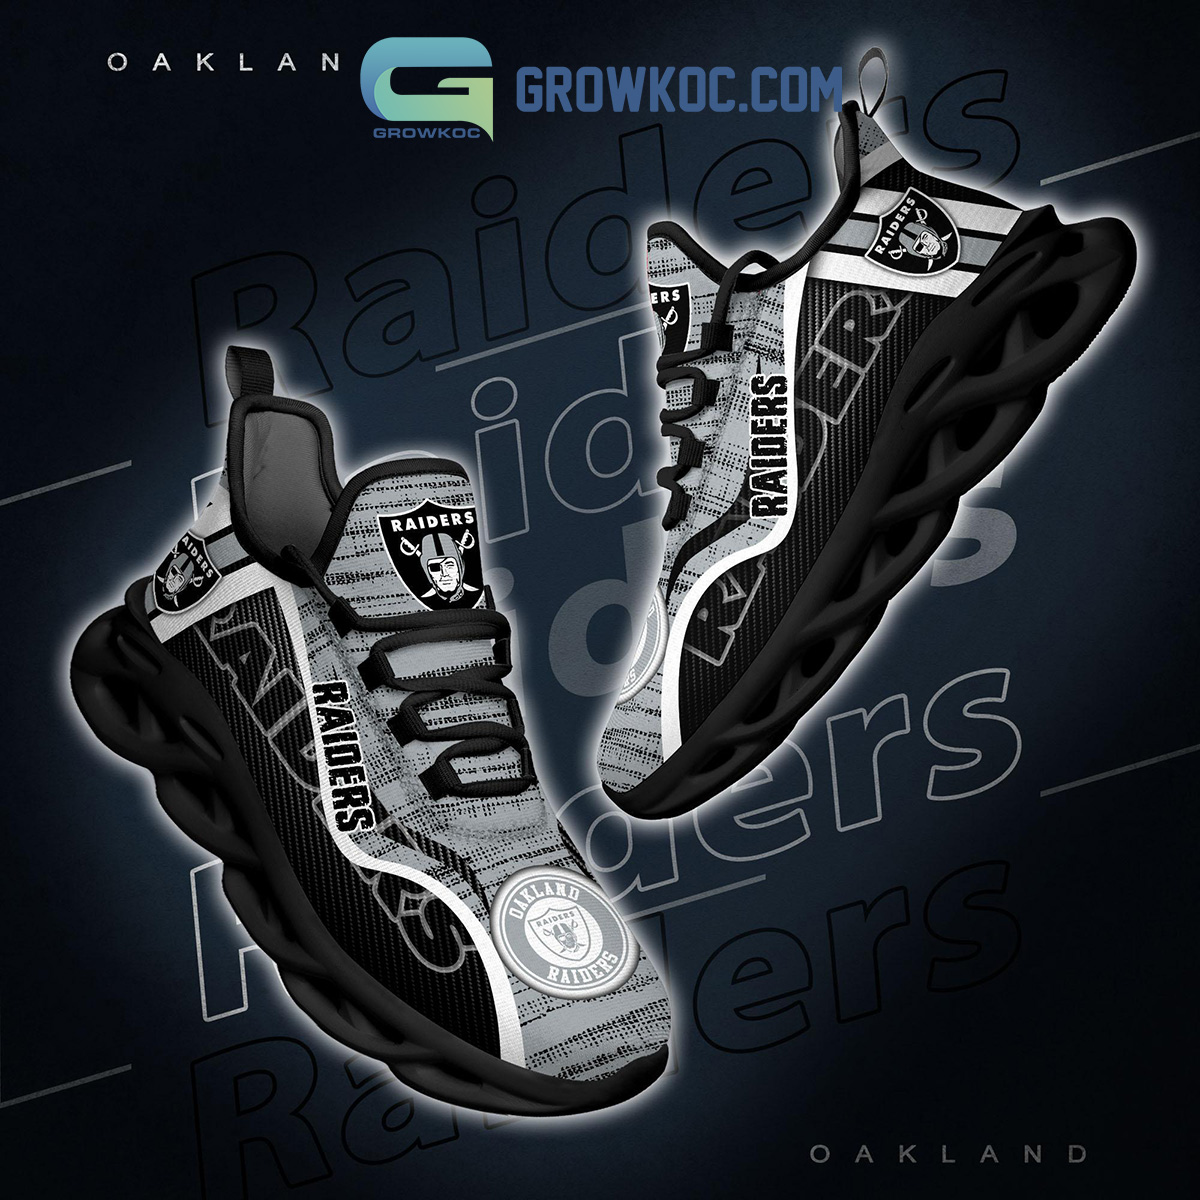 Las Vegas Raiders NFL Clunky Max Soul Shoes Custom Name Ideal Gift For Men  And Women Fans